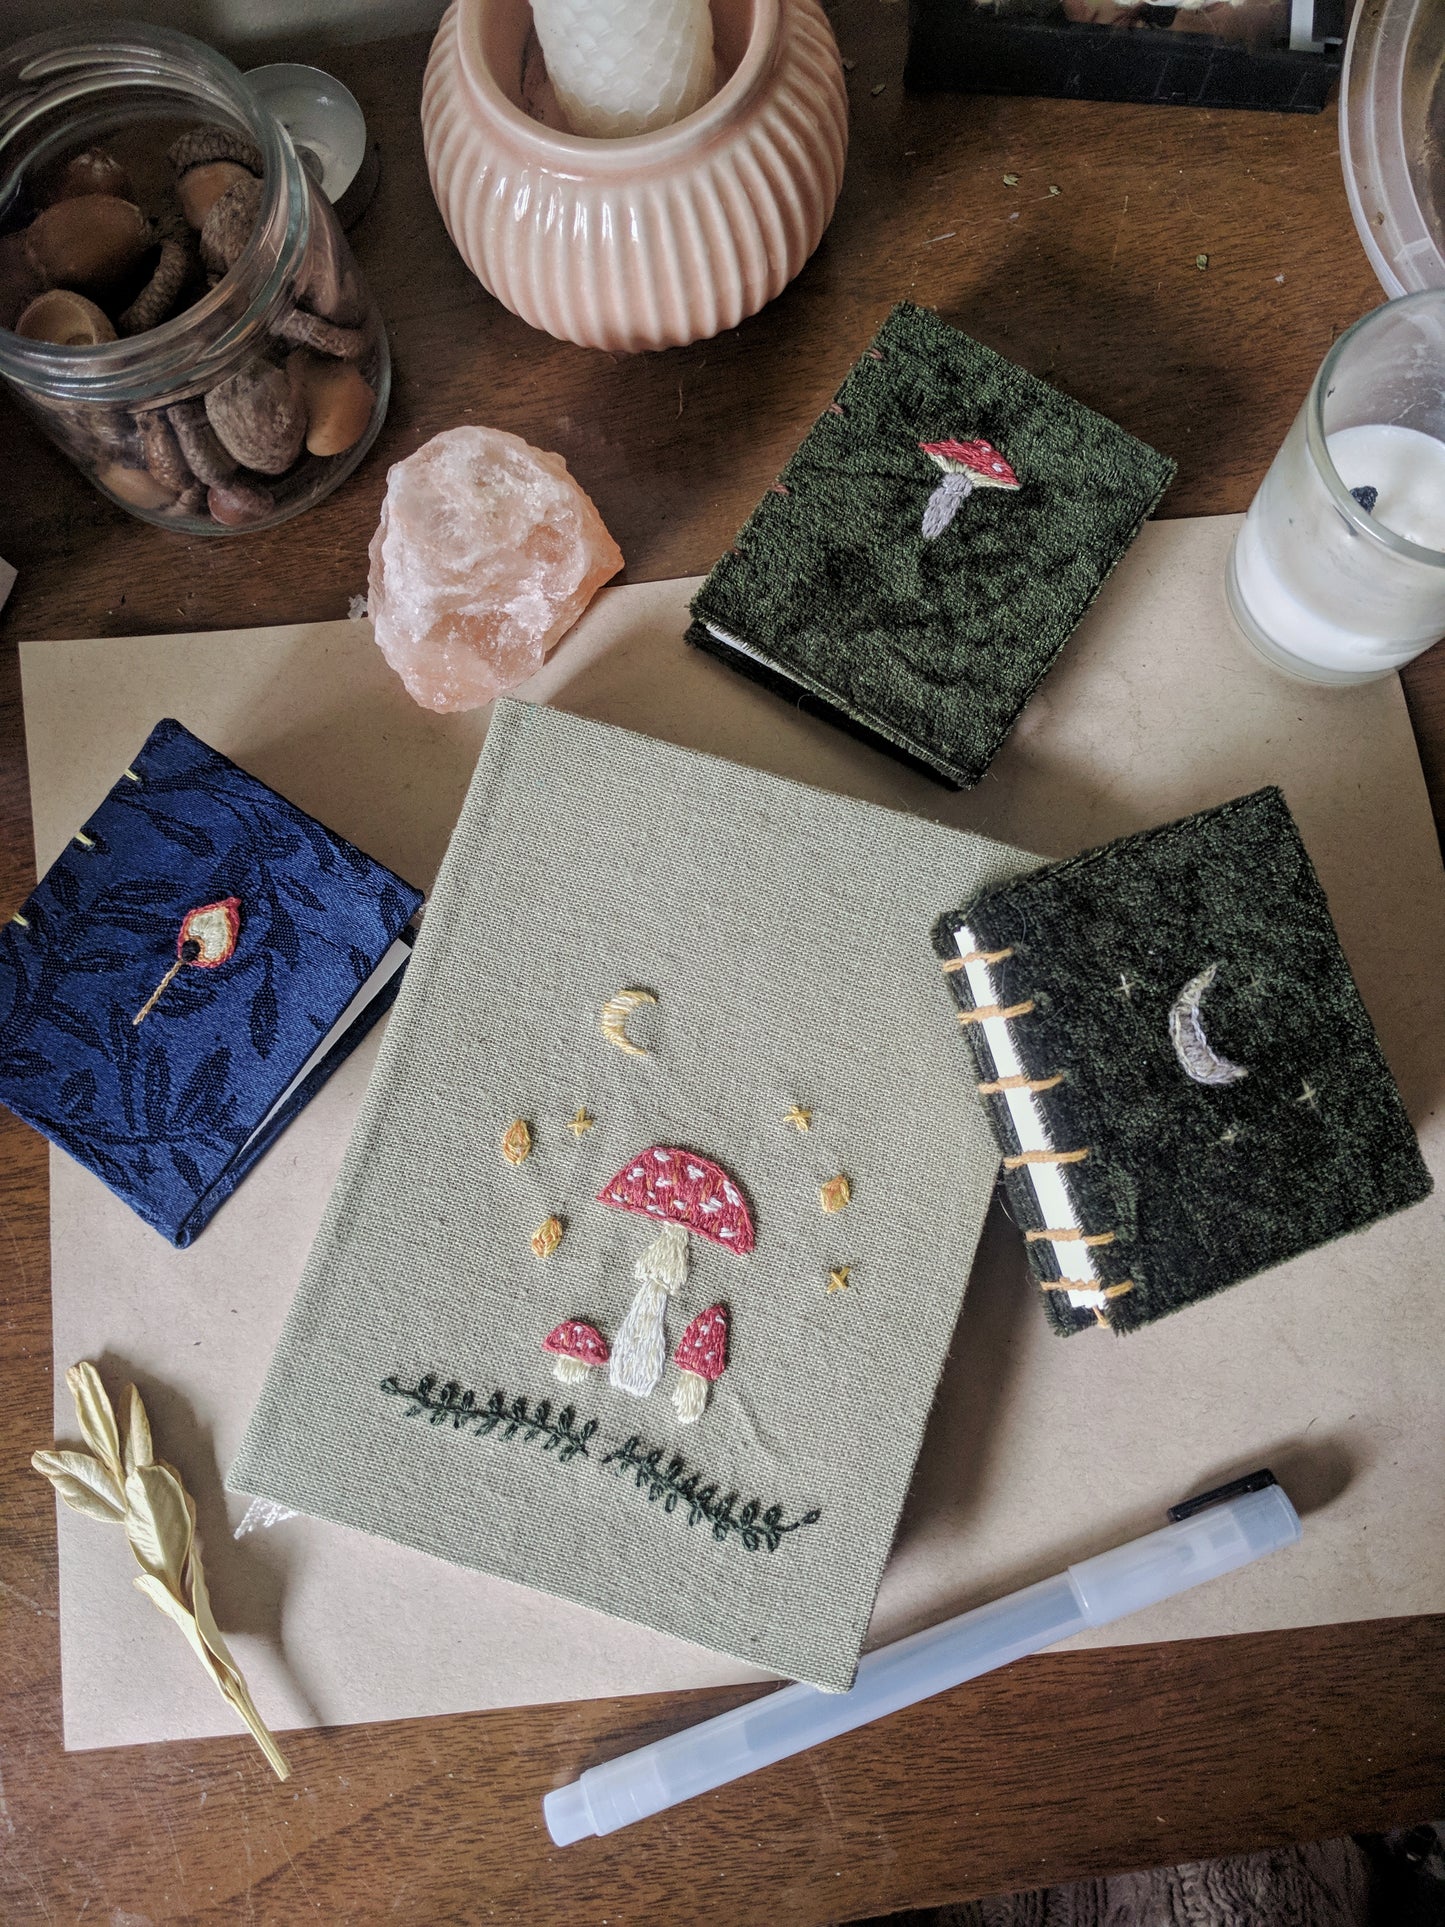 small (5.5x4.25 in) mushroom night sky embroidered book - 48 blank pages